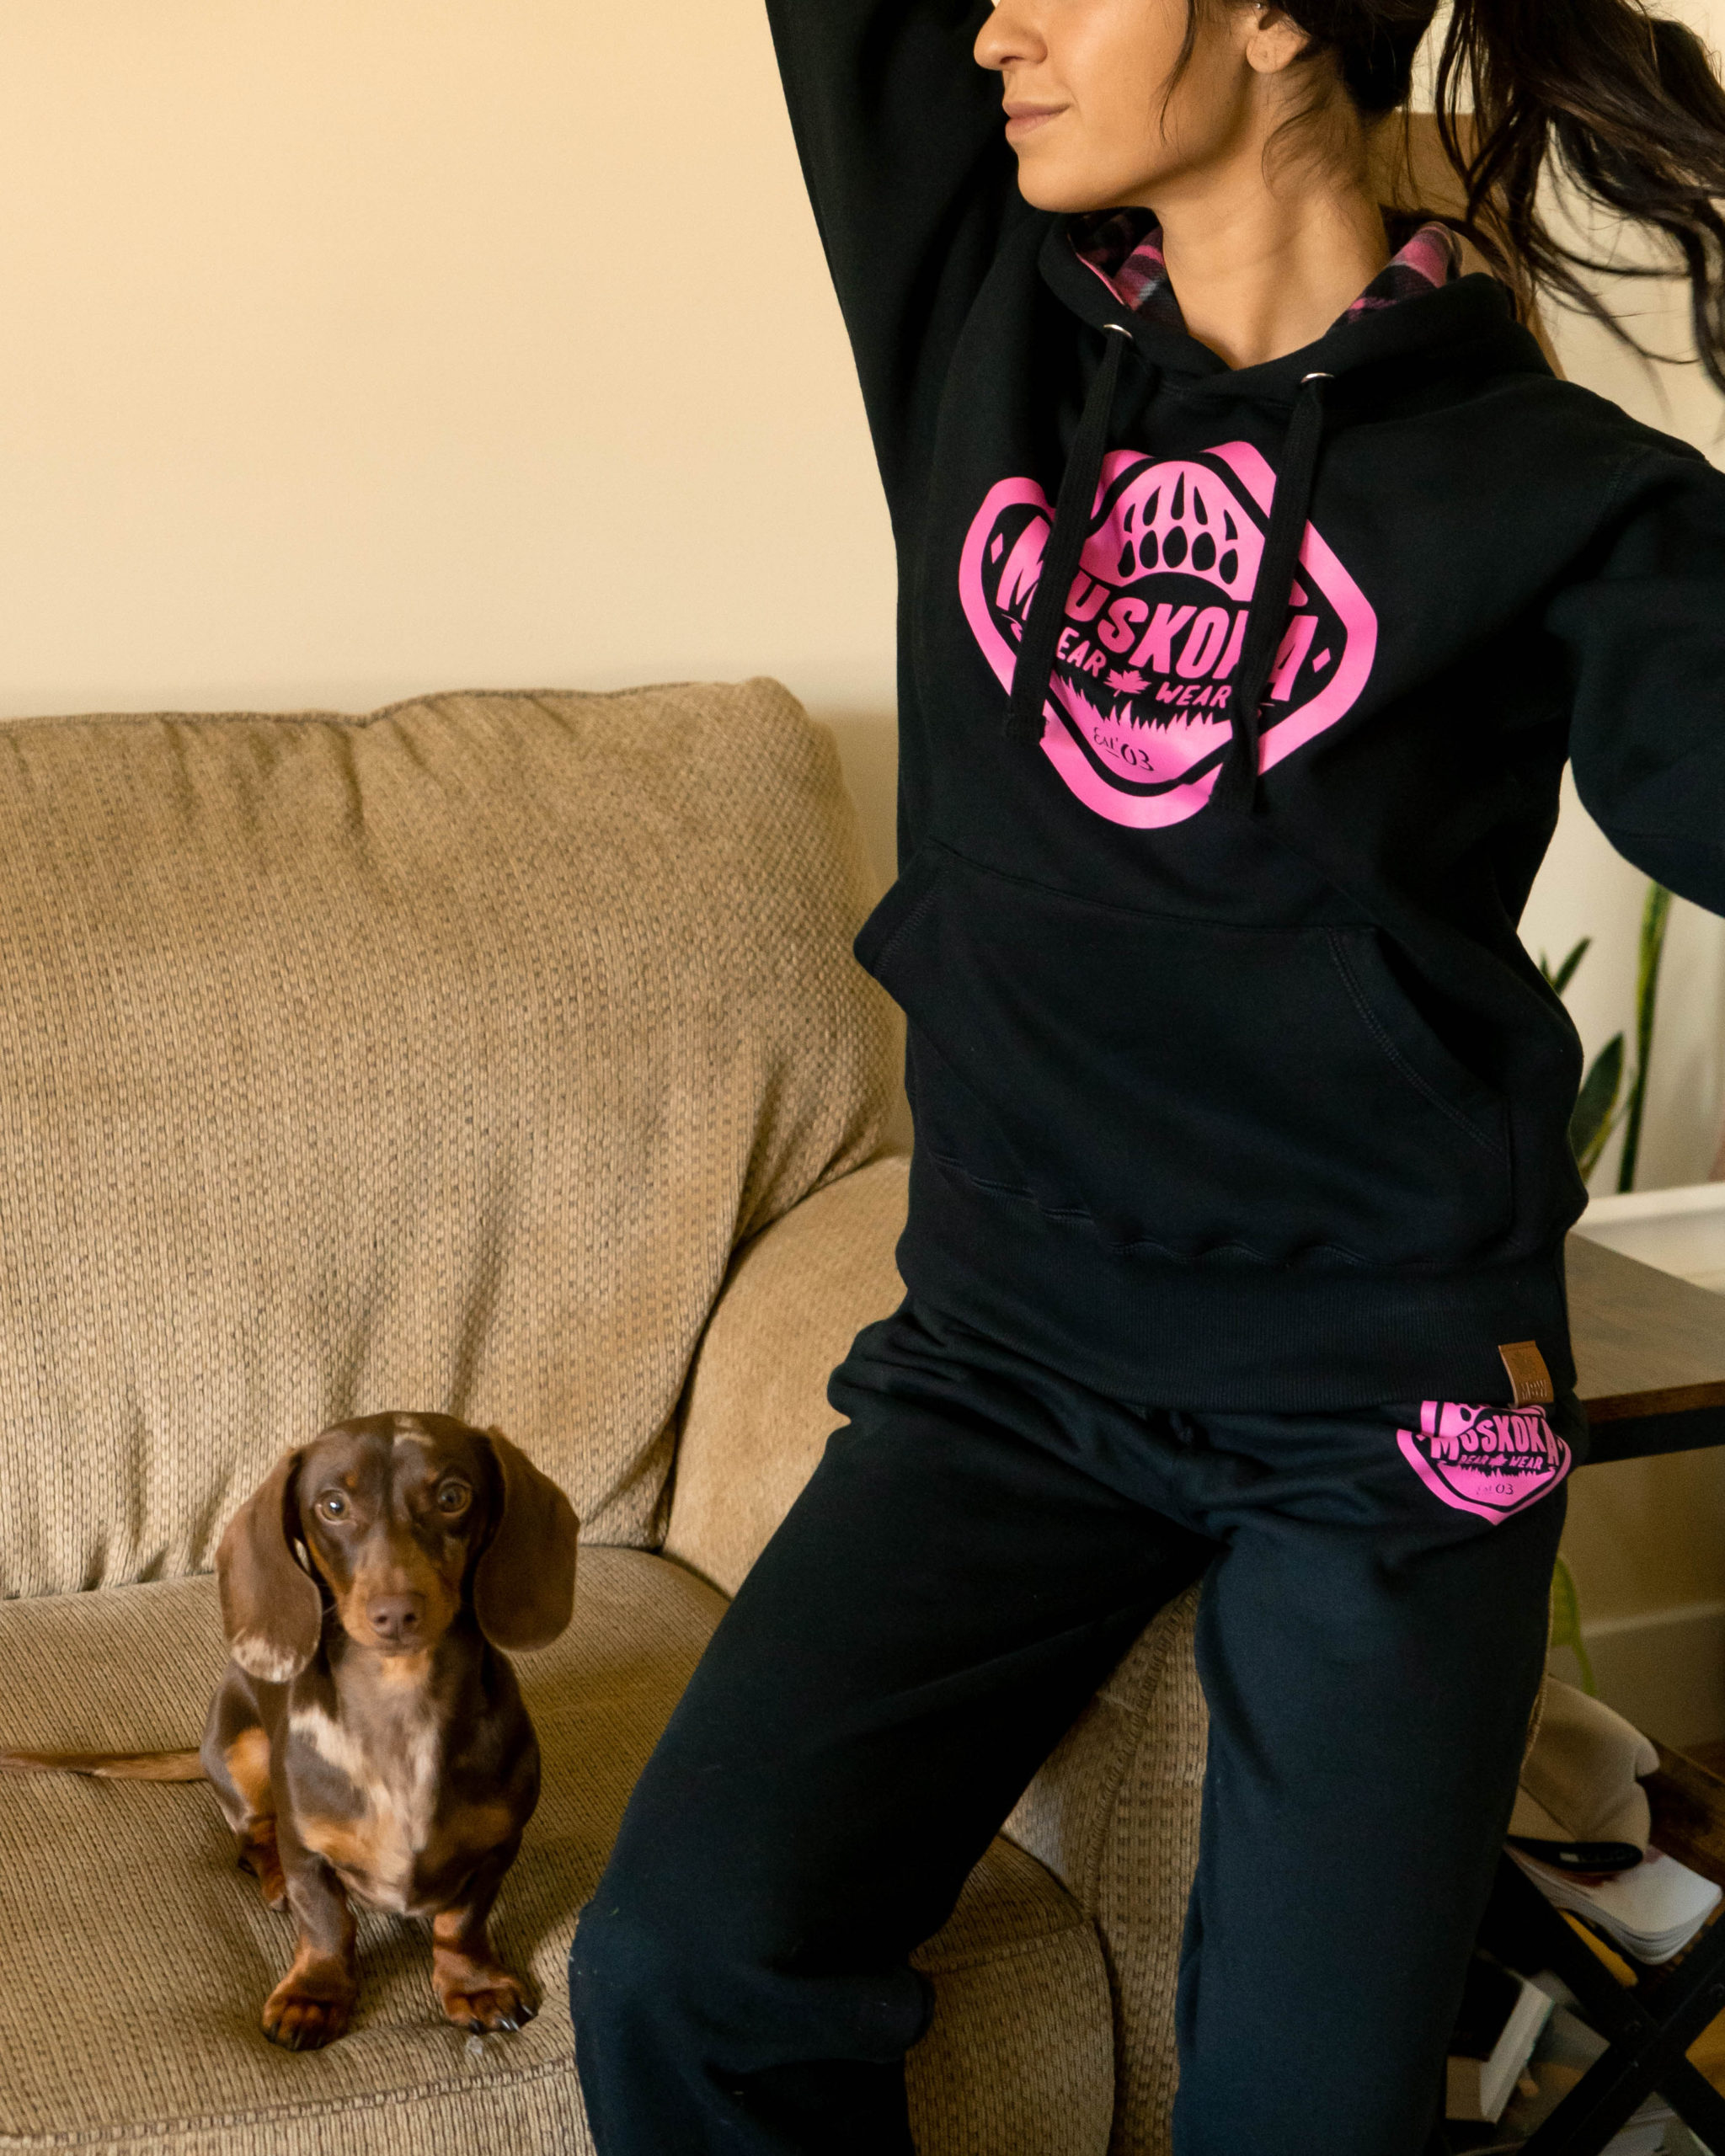 Content Creator Mal.Bee wearing the Black with Raspberry Ladies Cabin Hoody and Original Paw Pants